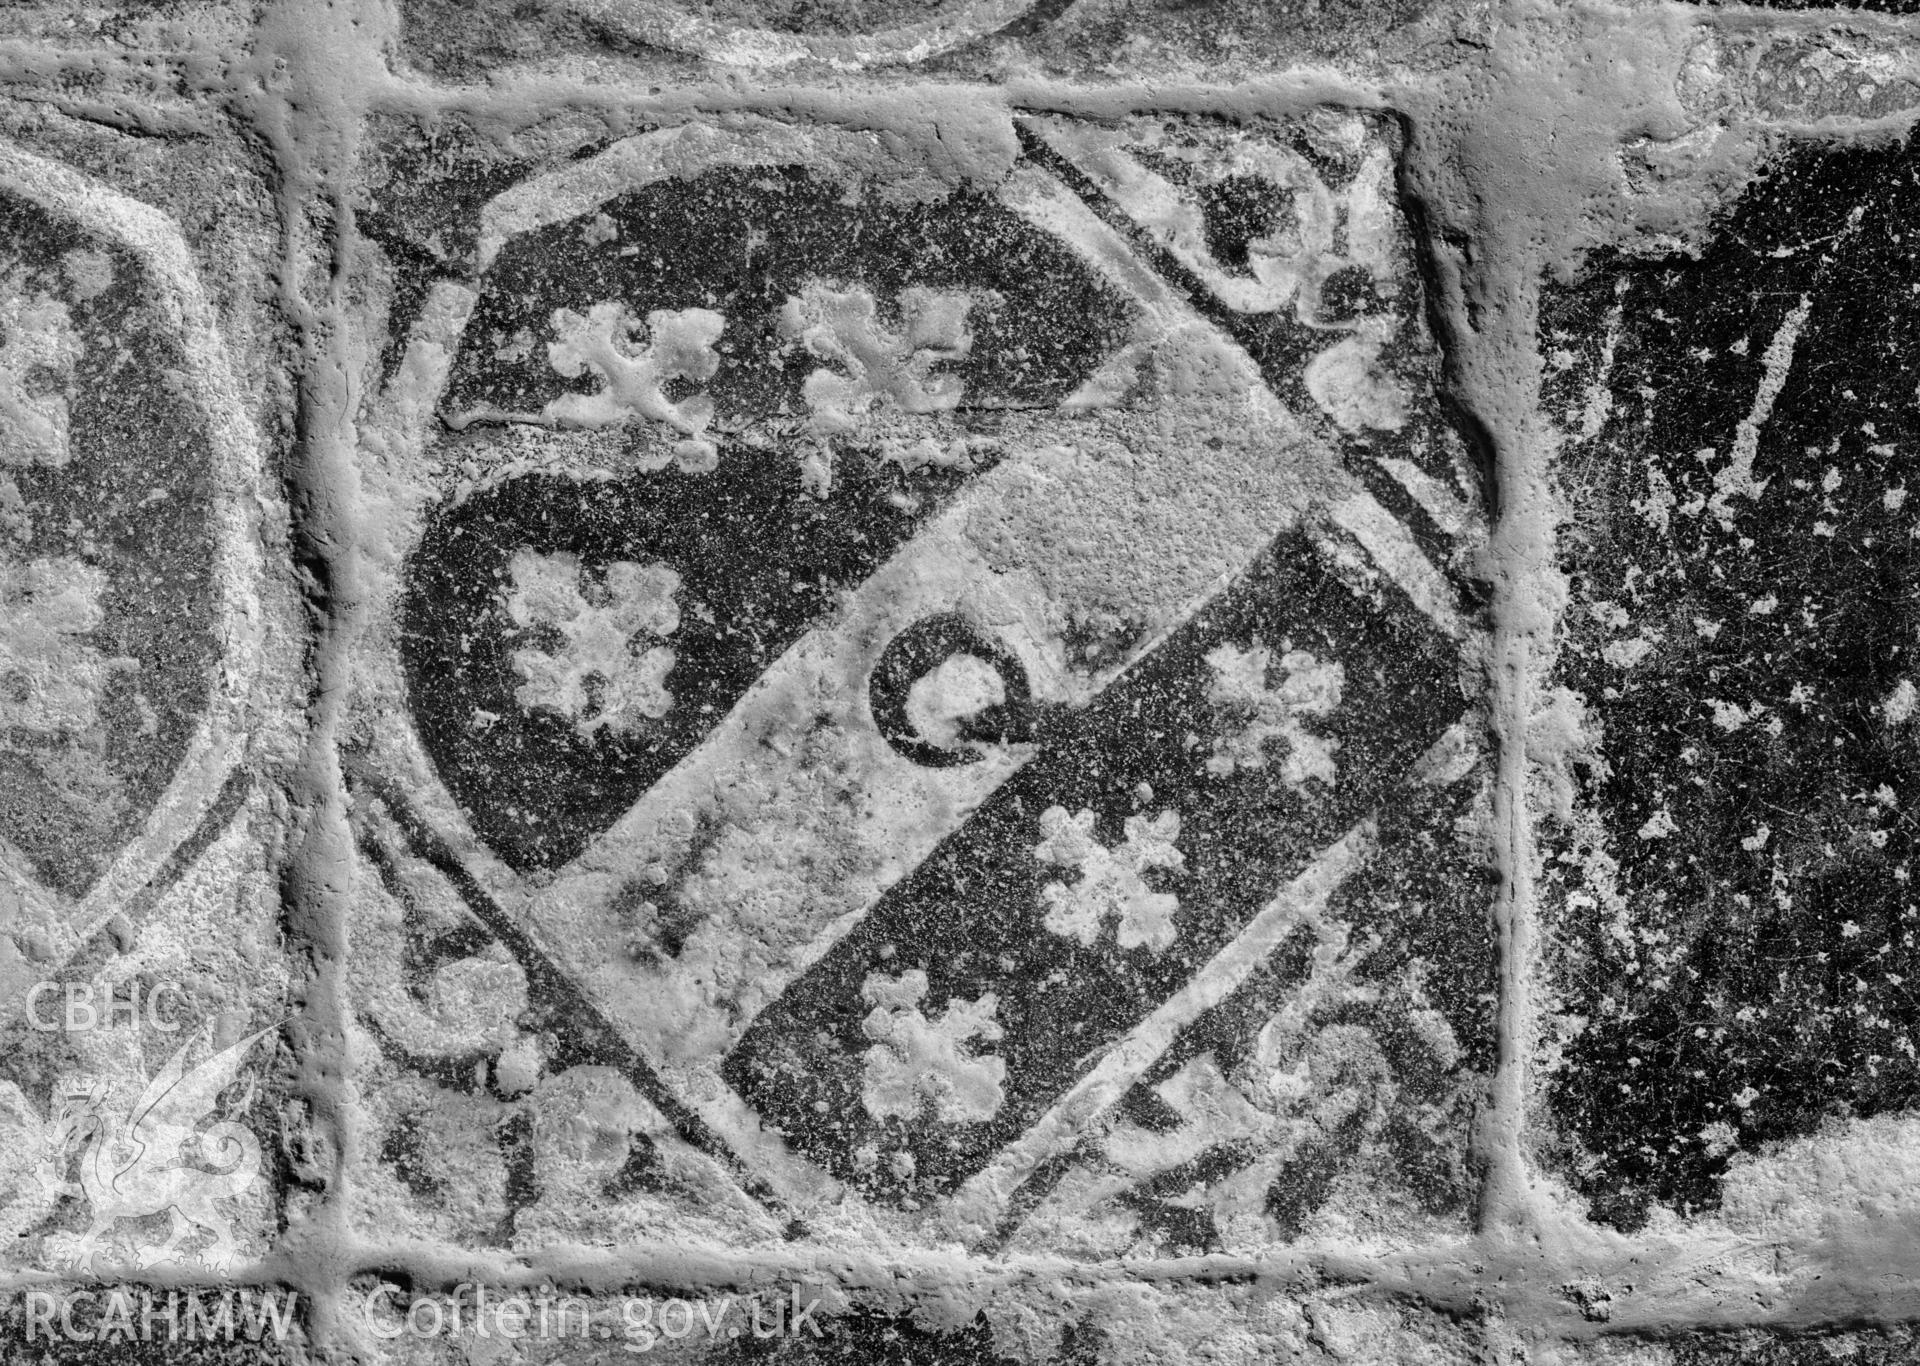 Interior view of St Davids Cathedral showing floor tile.